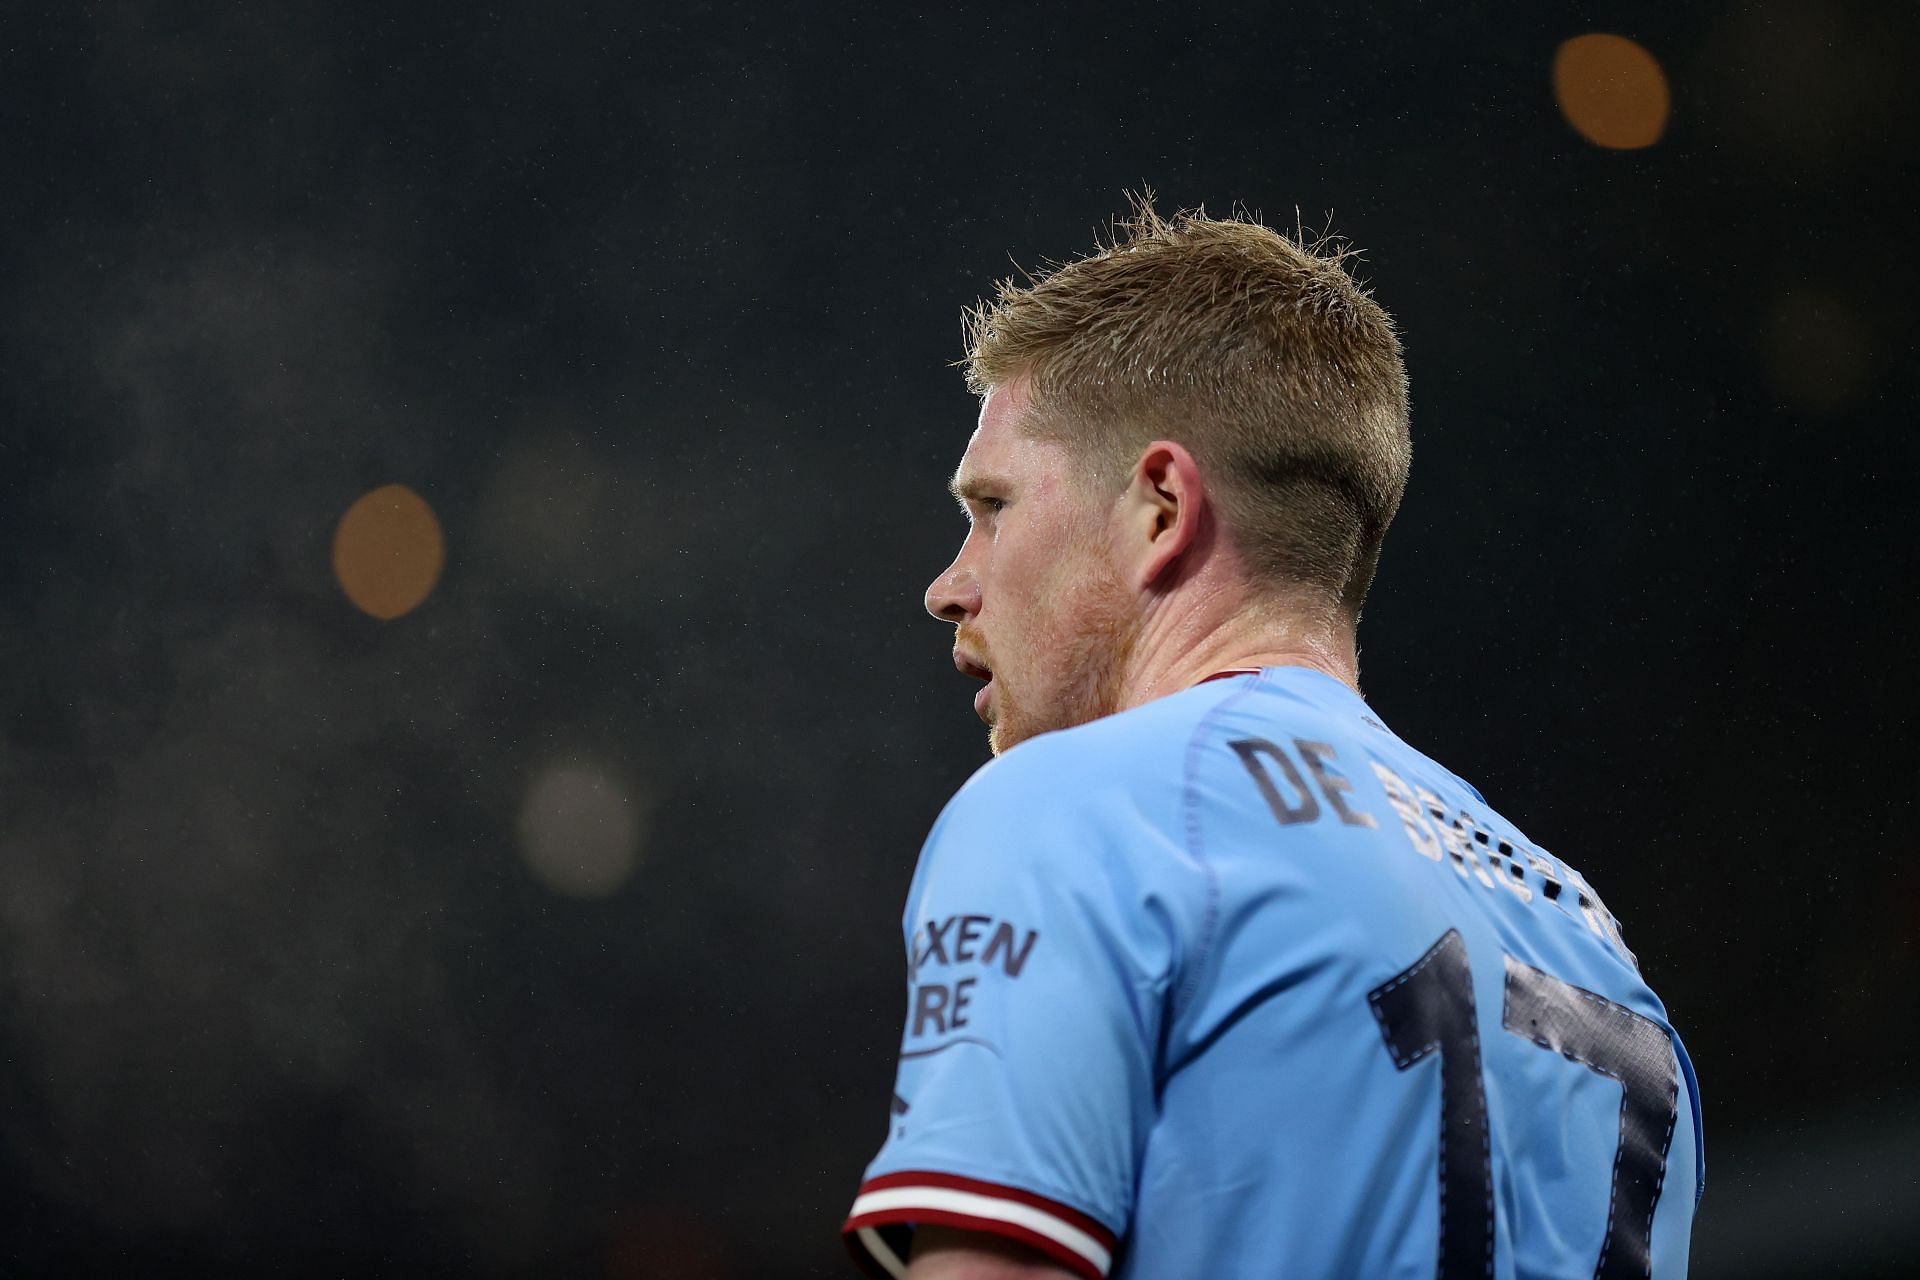 De Bruyne has the most assists in the Premier League this season